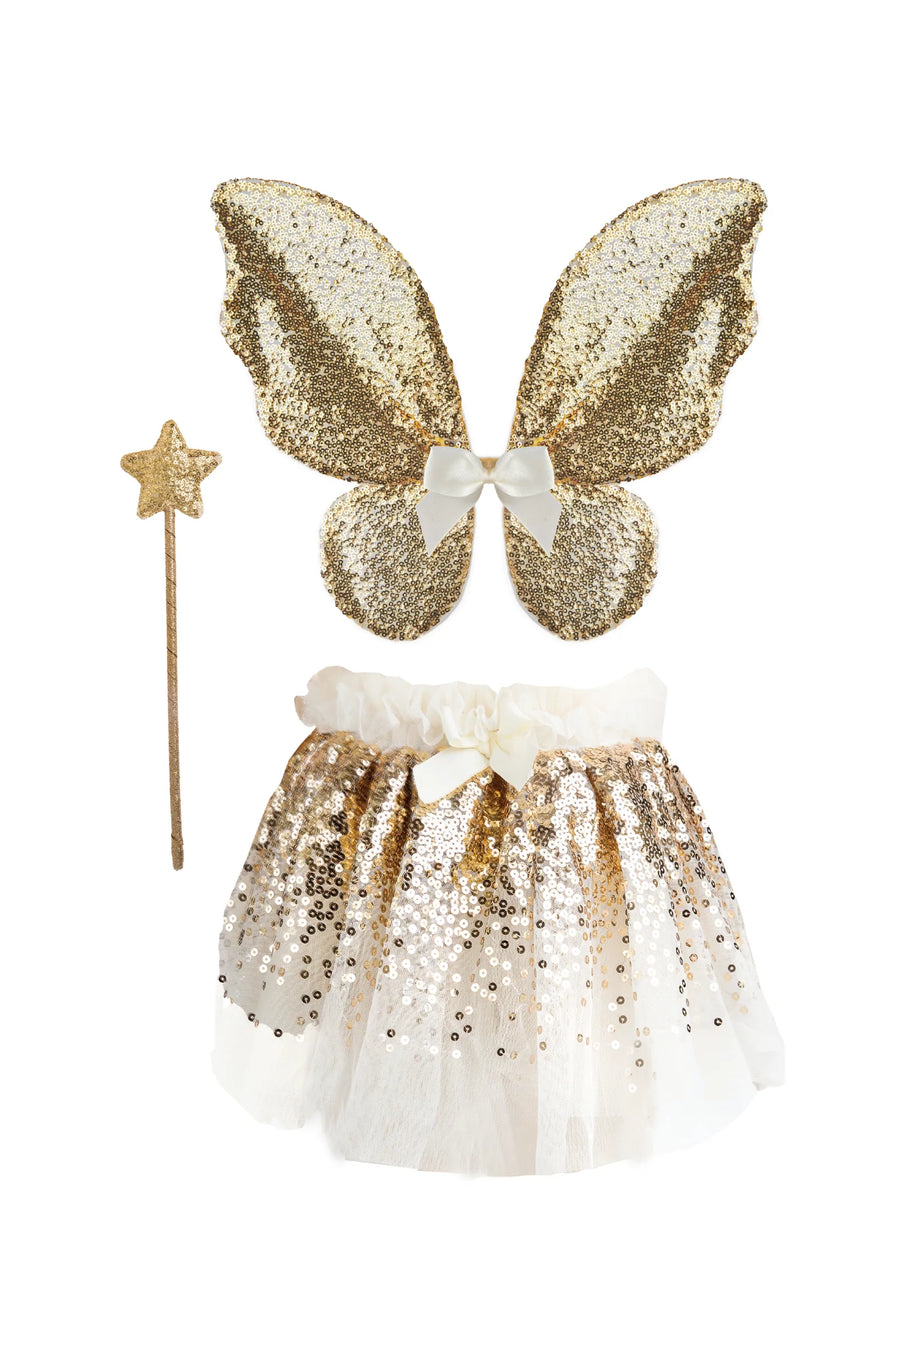 Great Pretenders Gracious Gold Sequins Set - Skirt, Wand and Wings |Mockingbird Baby & Kids